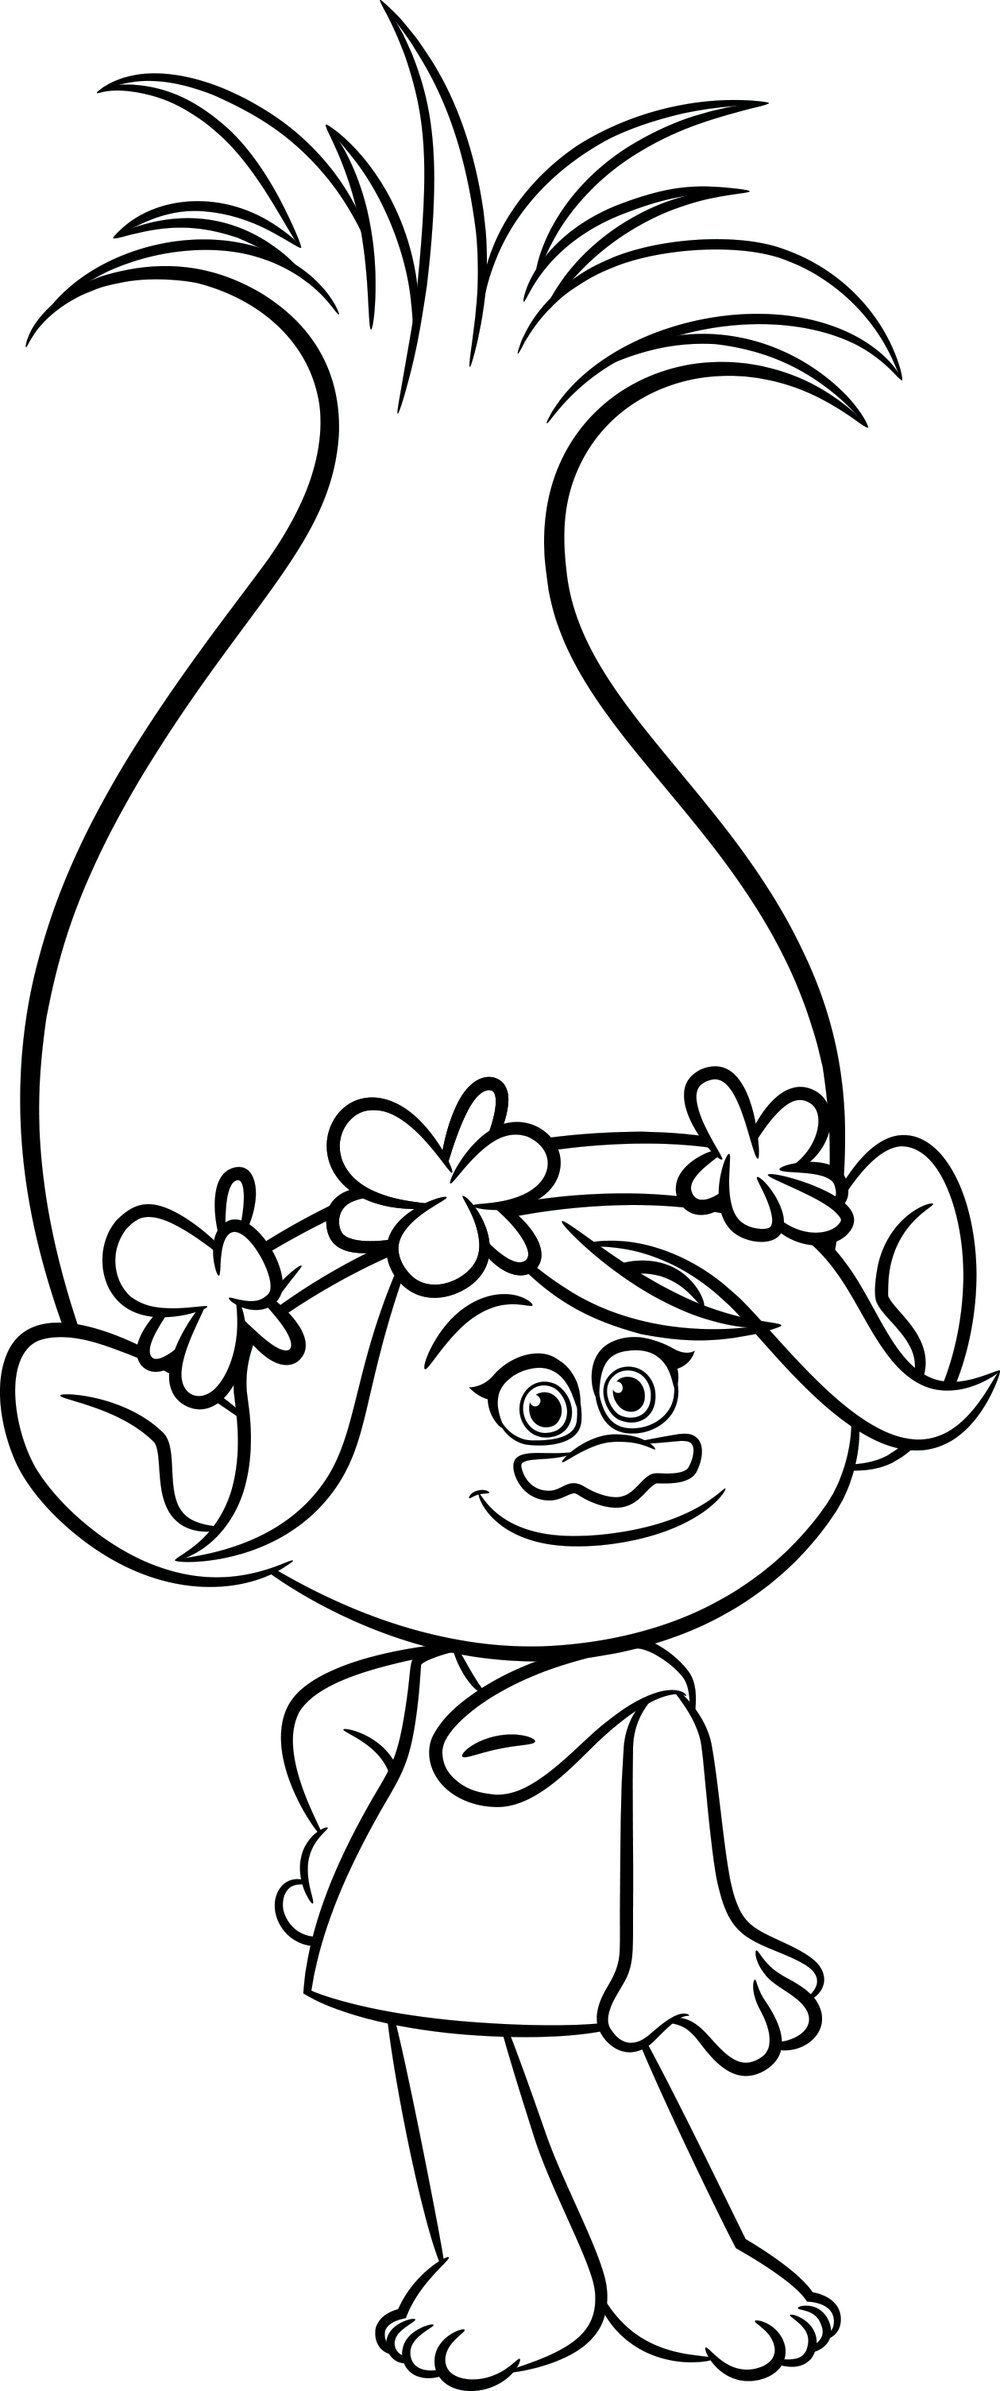 poppy coloring page poppy coloring page for adults the graphics fairy poppy page coloring 